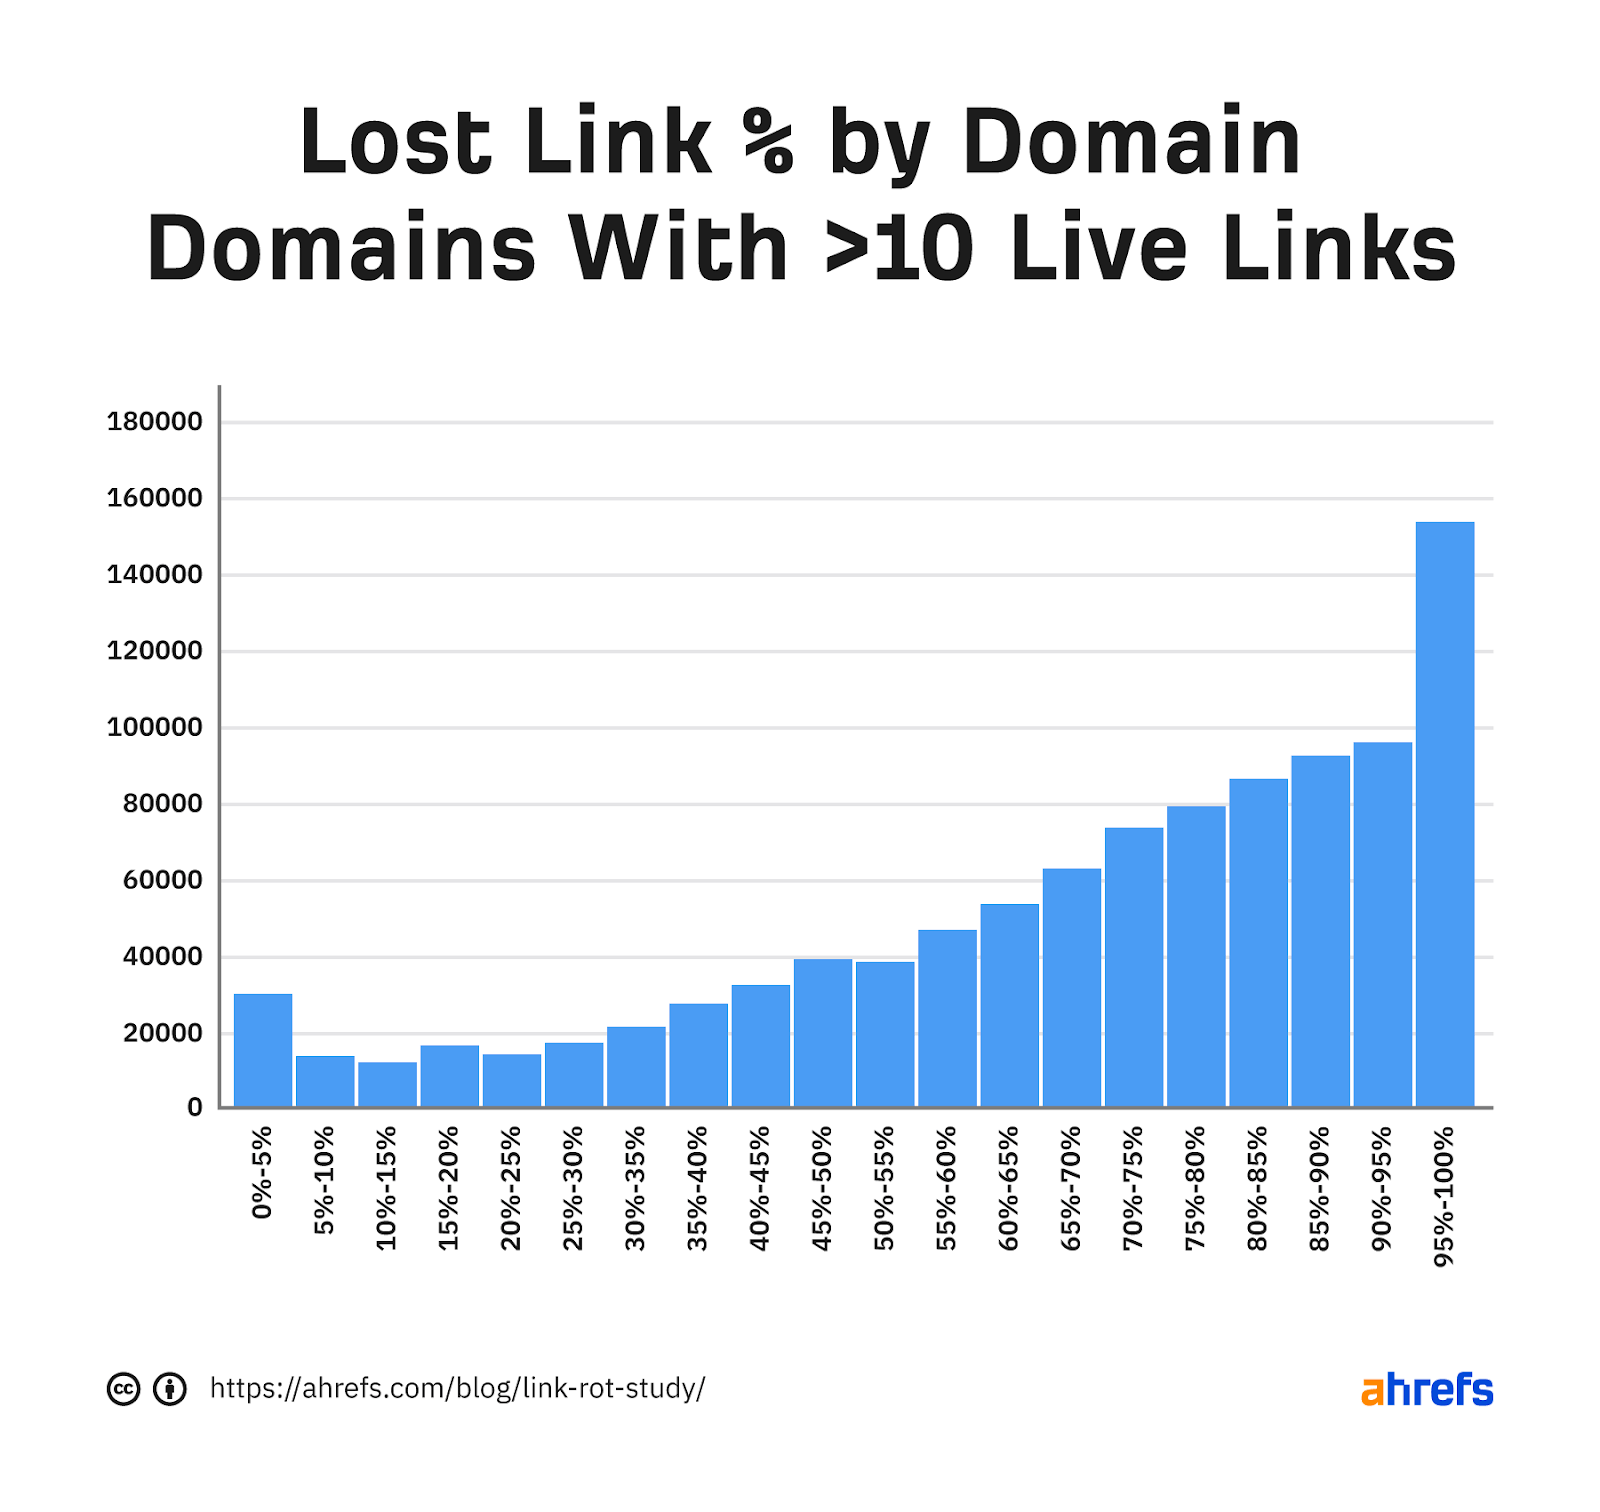 Histogram showing lost link percentage by domain, filtered to greater than 10 live links